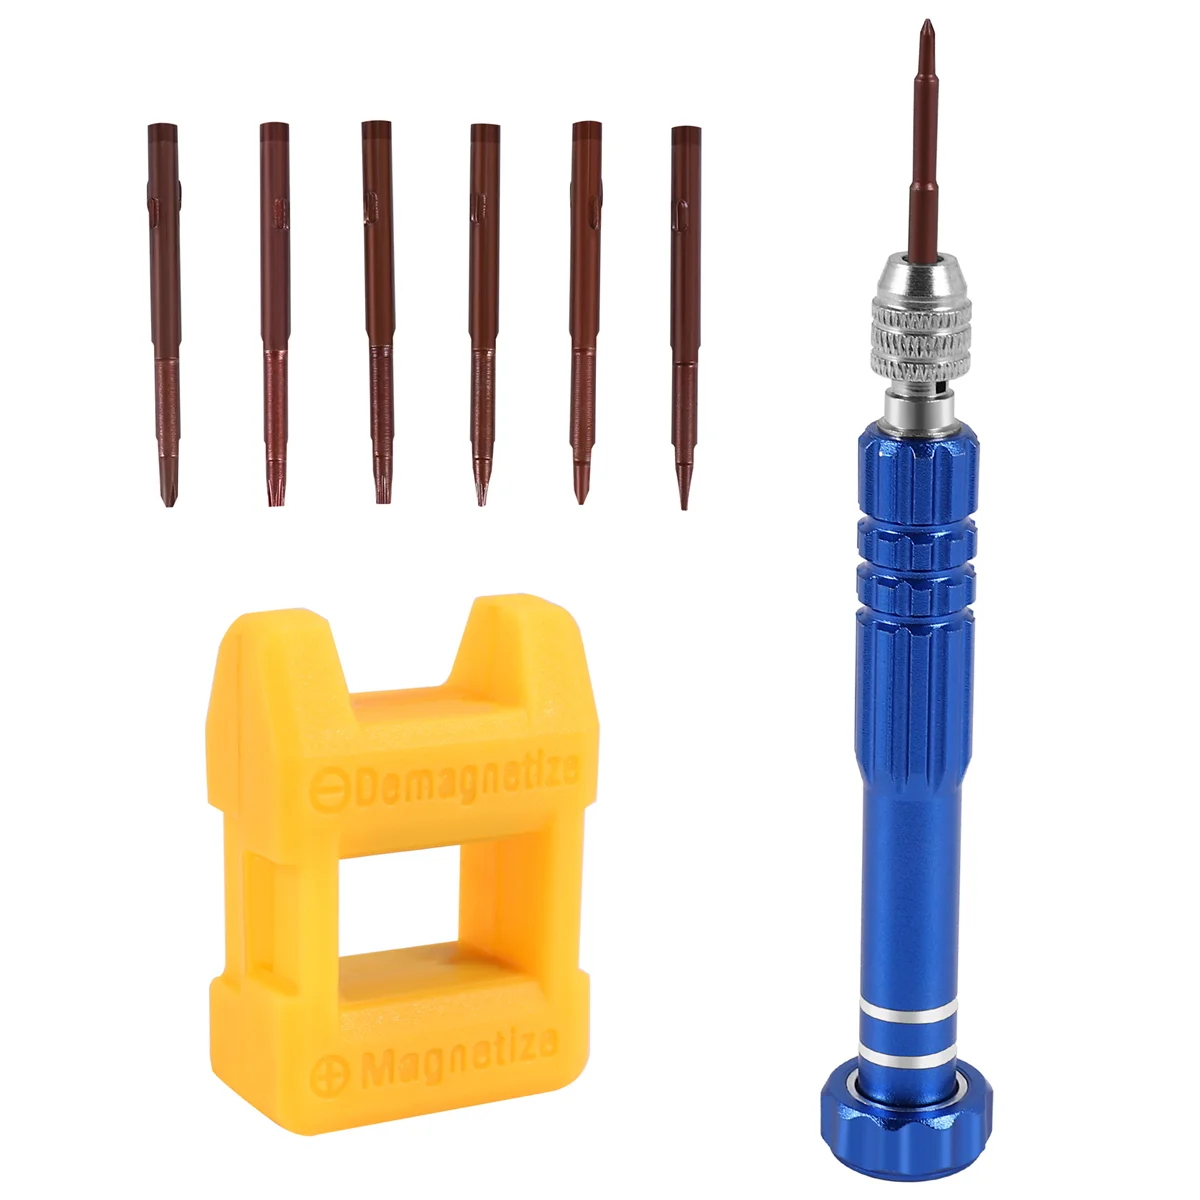 

Magnetic 6 in 1 Tiny Screw Driver Kit, Small Screwdriver Set Perfect Mini Screws for Cell Phones, Watch, Eyeglass Etc